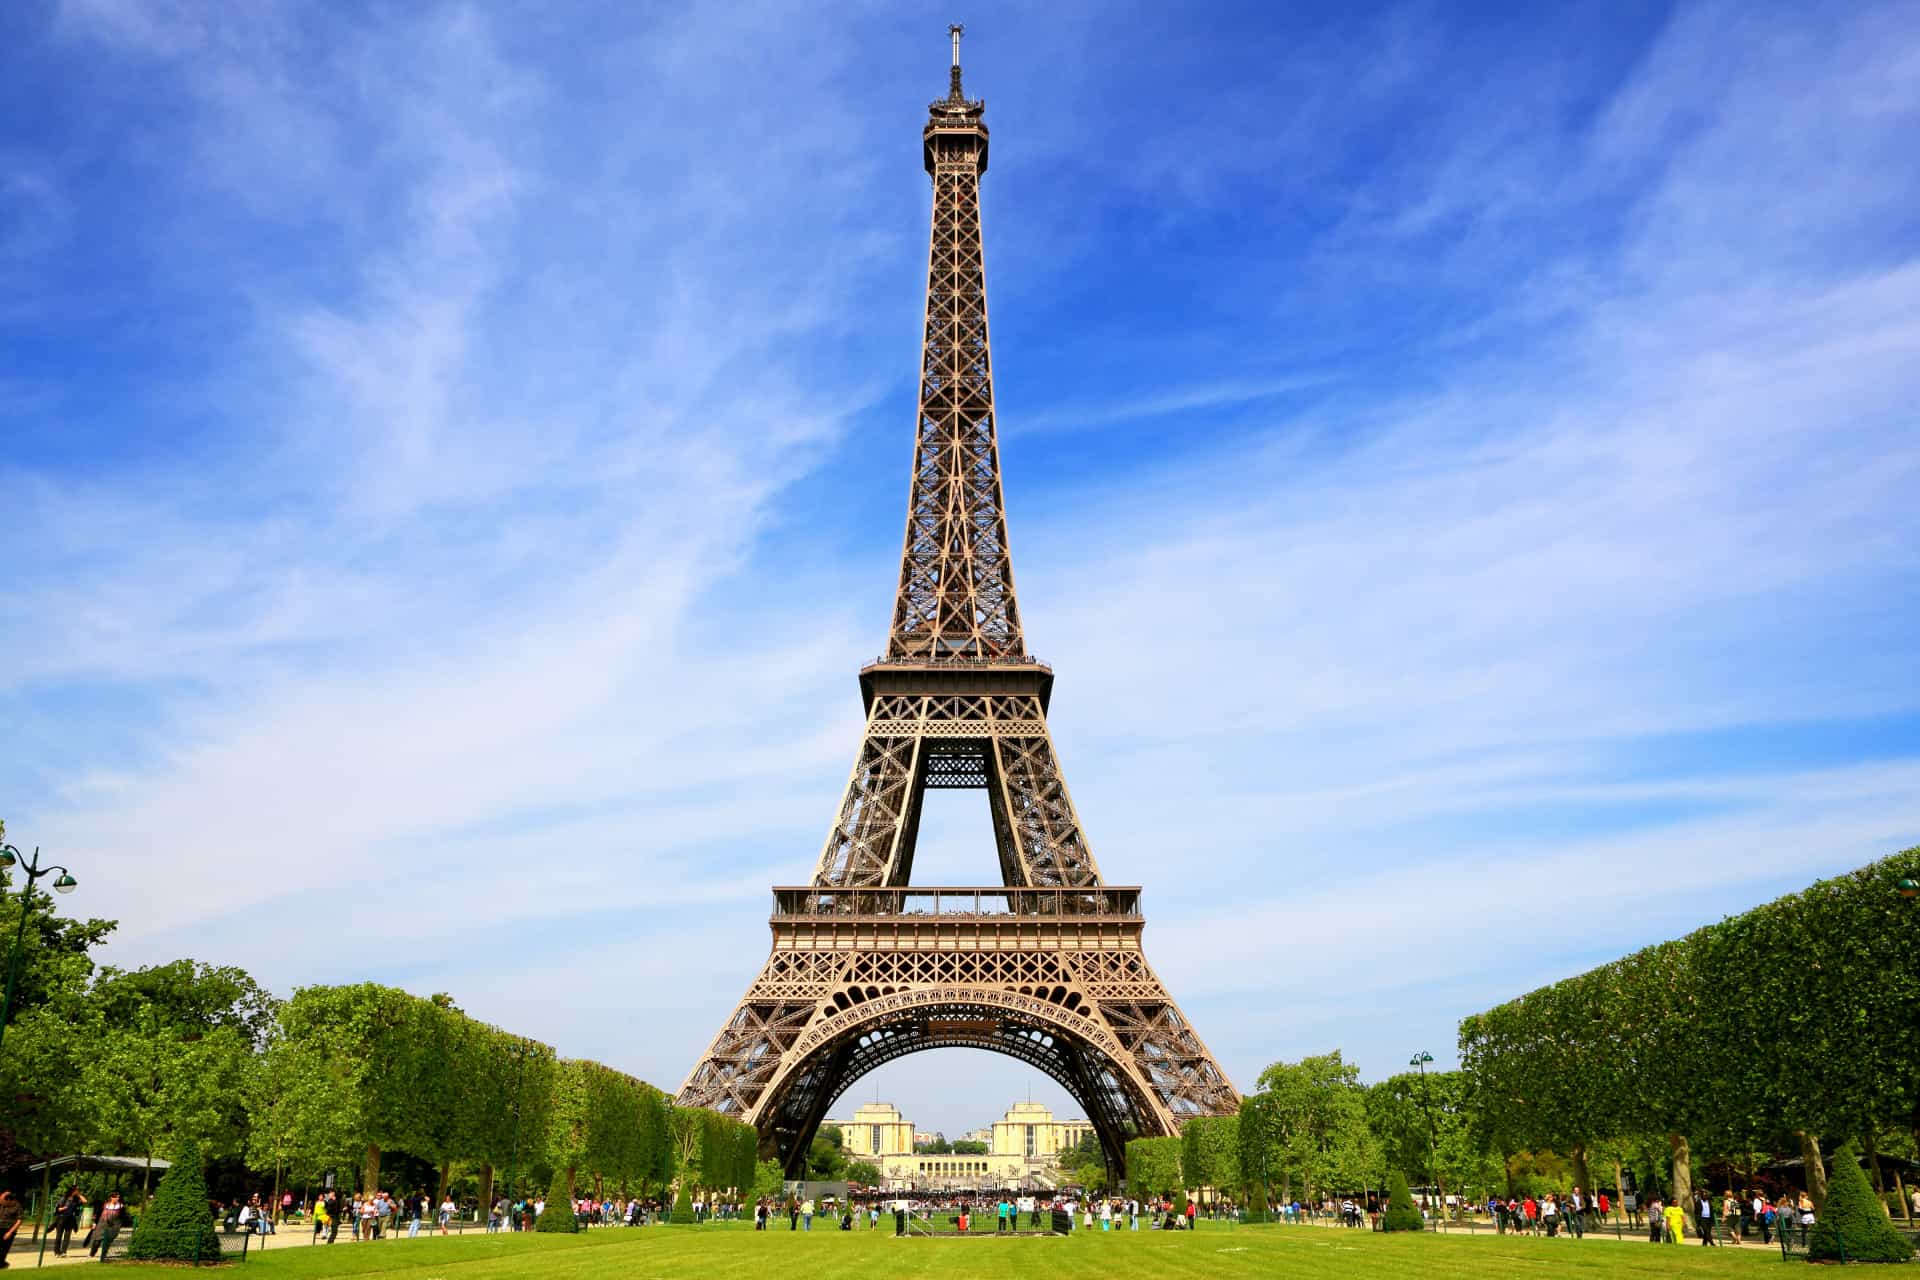 When Hitler visited Paris during World War II, the French cut the Eiffel Tower's elevator cables to inconvenience the dictator's visit.<p><a href="https://www.msn.com/en-us/community/channel/vid-7xx8mnucu55yw63we9va2gwr7uihbxwc68fxqp25x6tg4ftibpra?cvid=94631541bc0f4f89bfd59158d696ad7e">Follow us and access great exclusive content everyday</a></p>